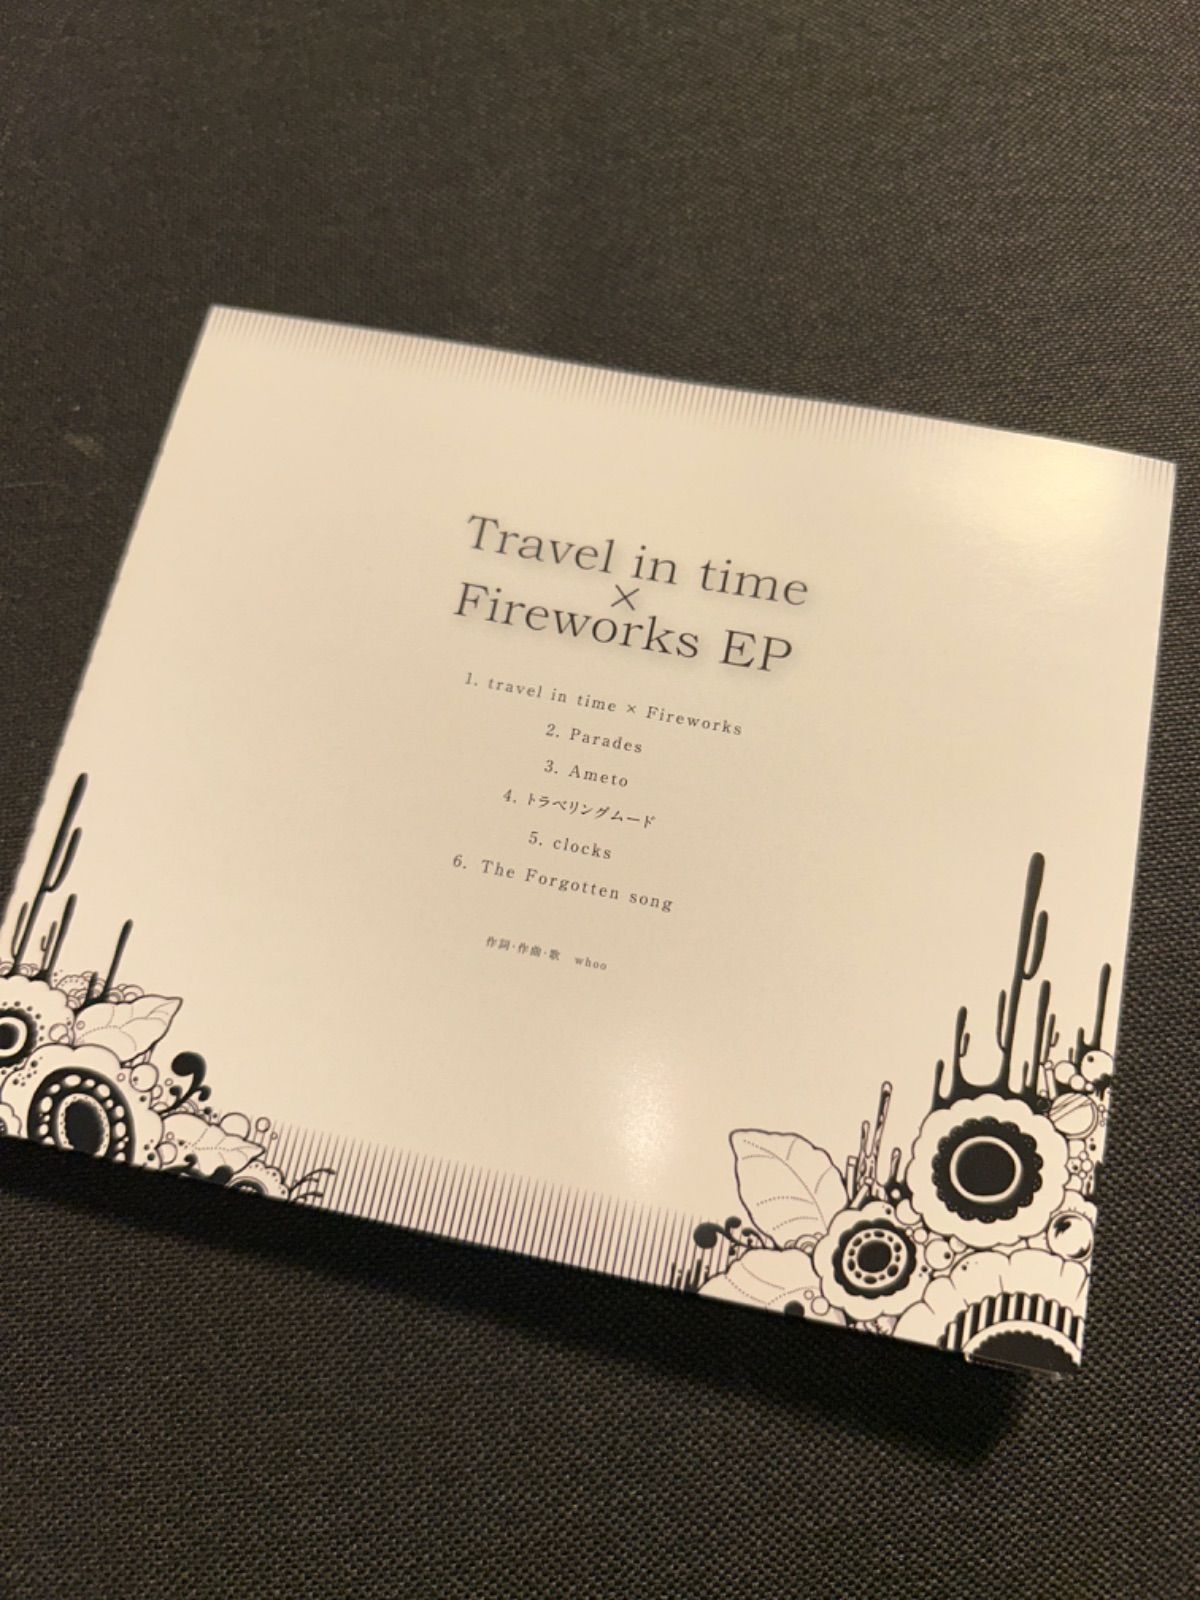 S2113)whoo / s10rw Travel in time × Fireworks EP CD travel in time  fireworks ep 東方 同人 - メルカリ